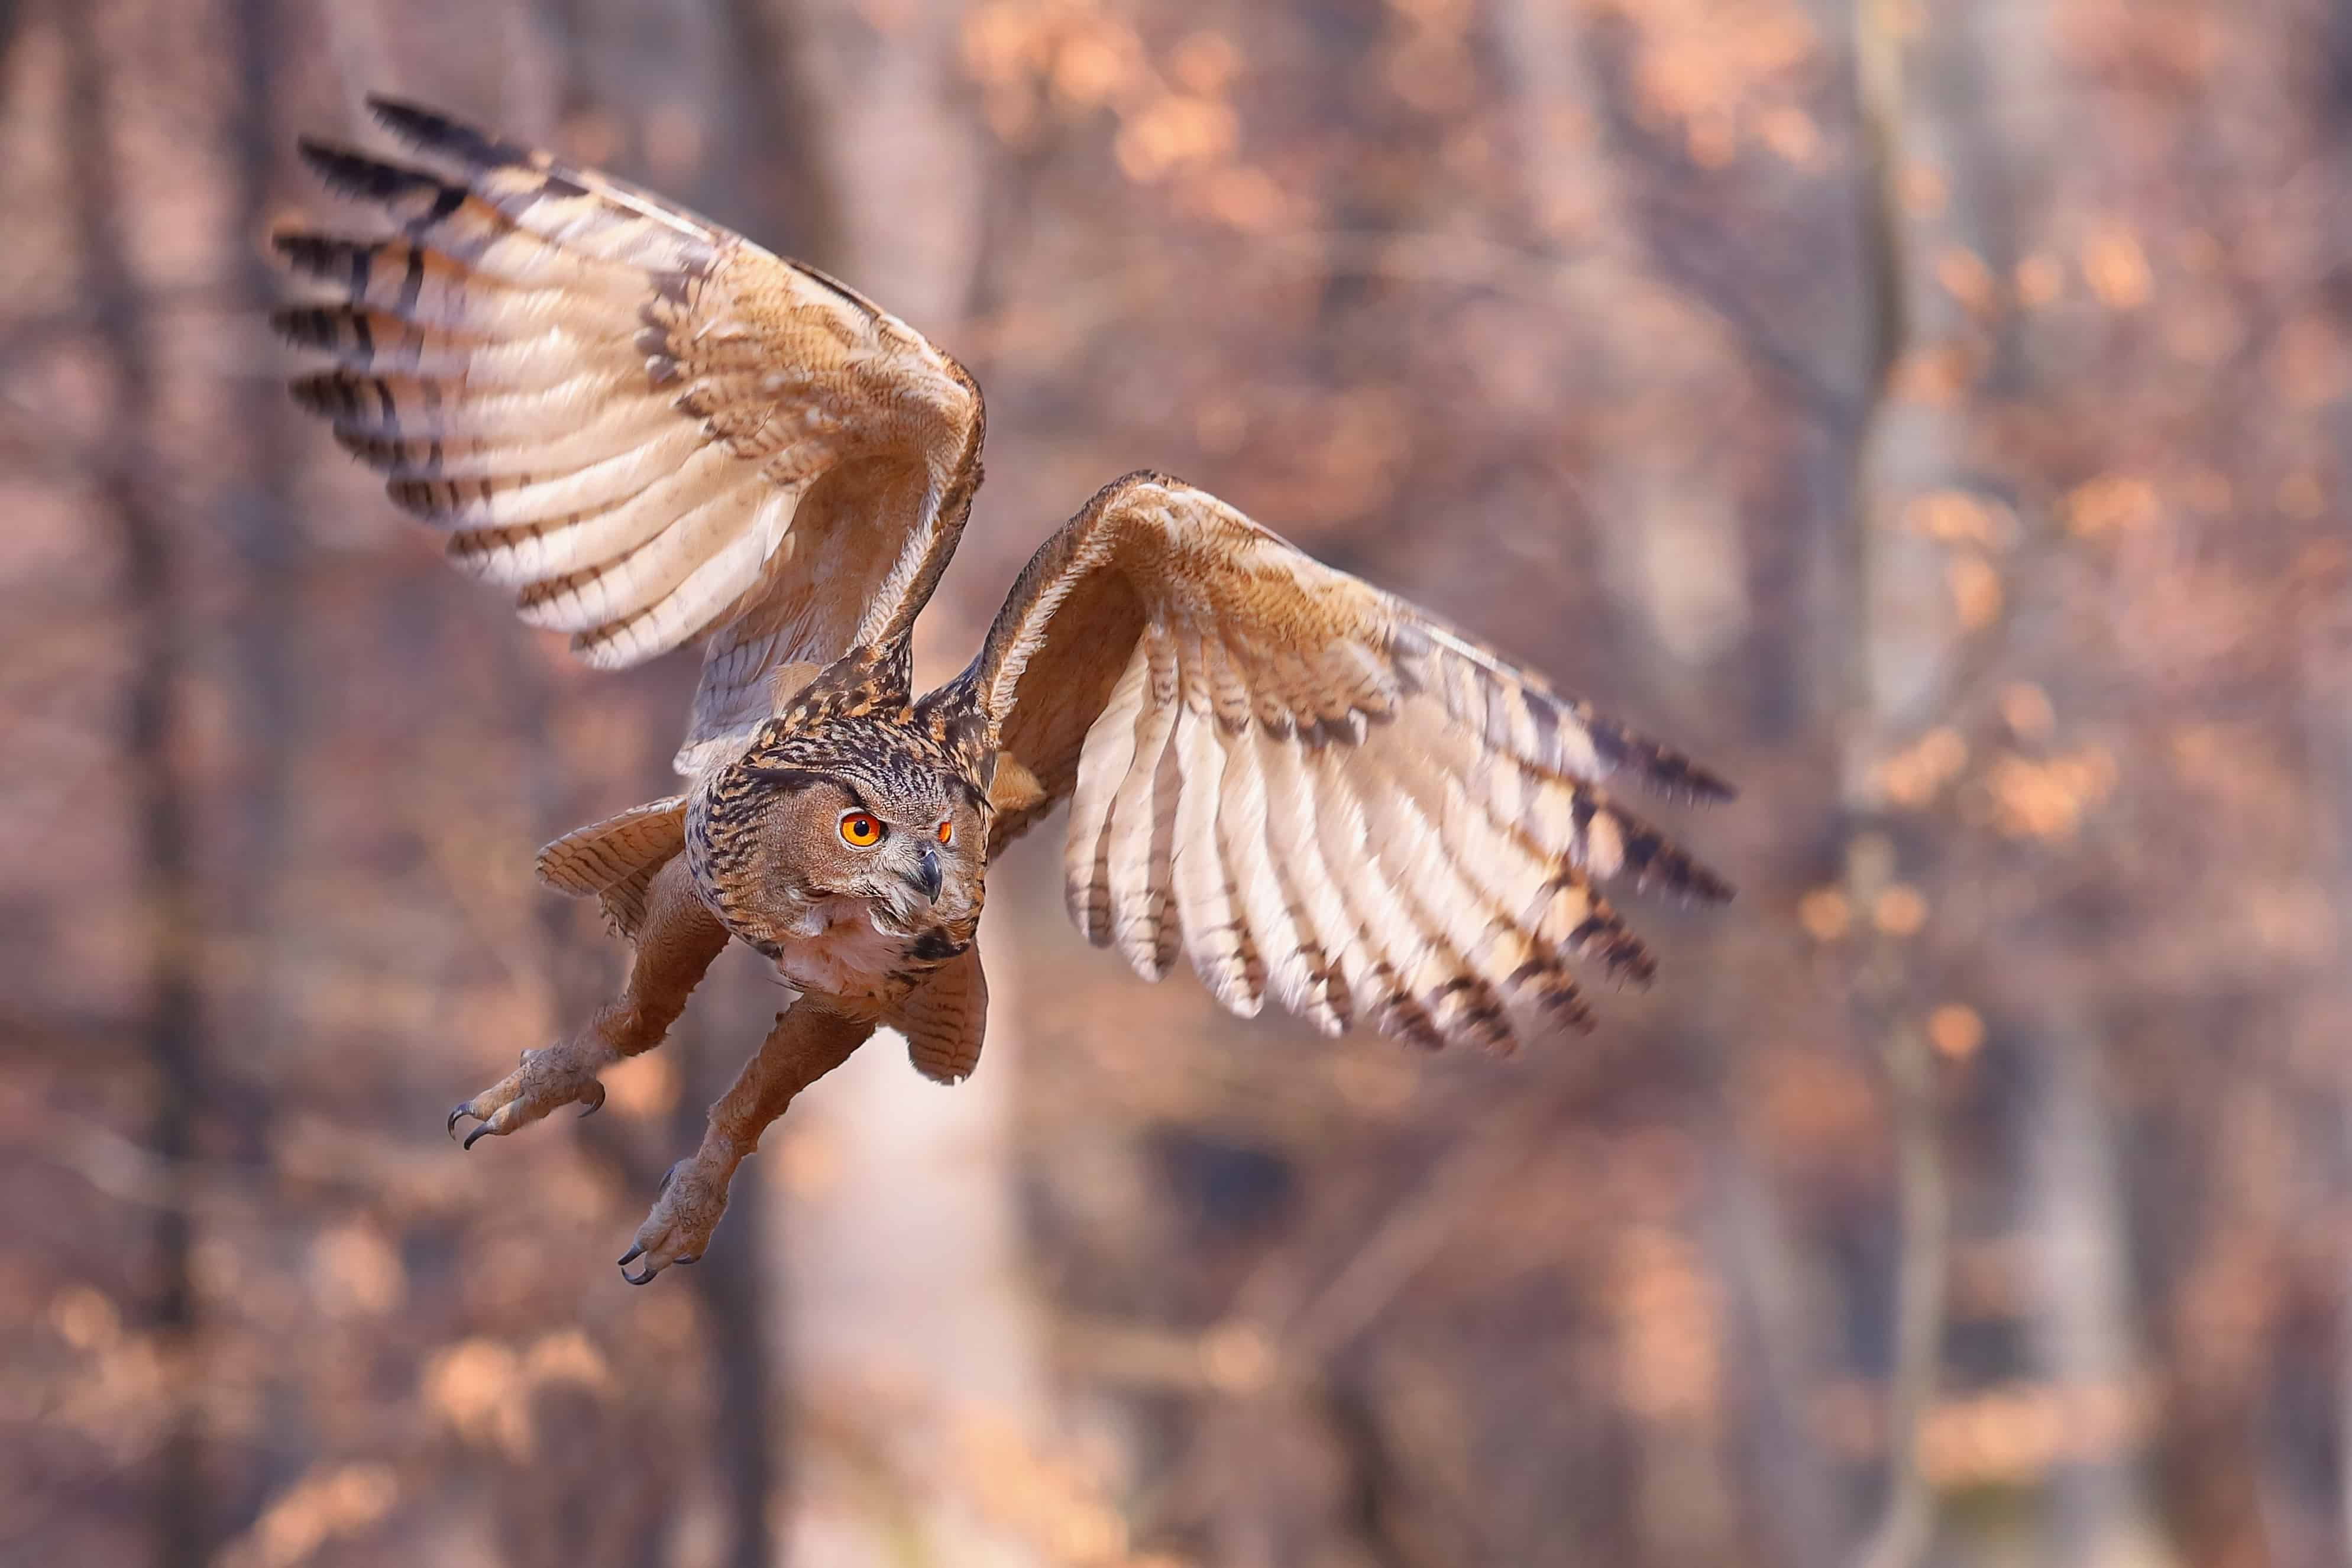 A large brown owl flying in the midst of the sunny day showing its powerful wings and muscled legs